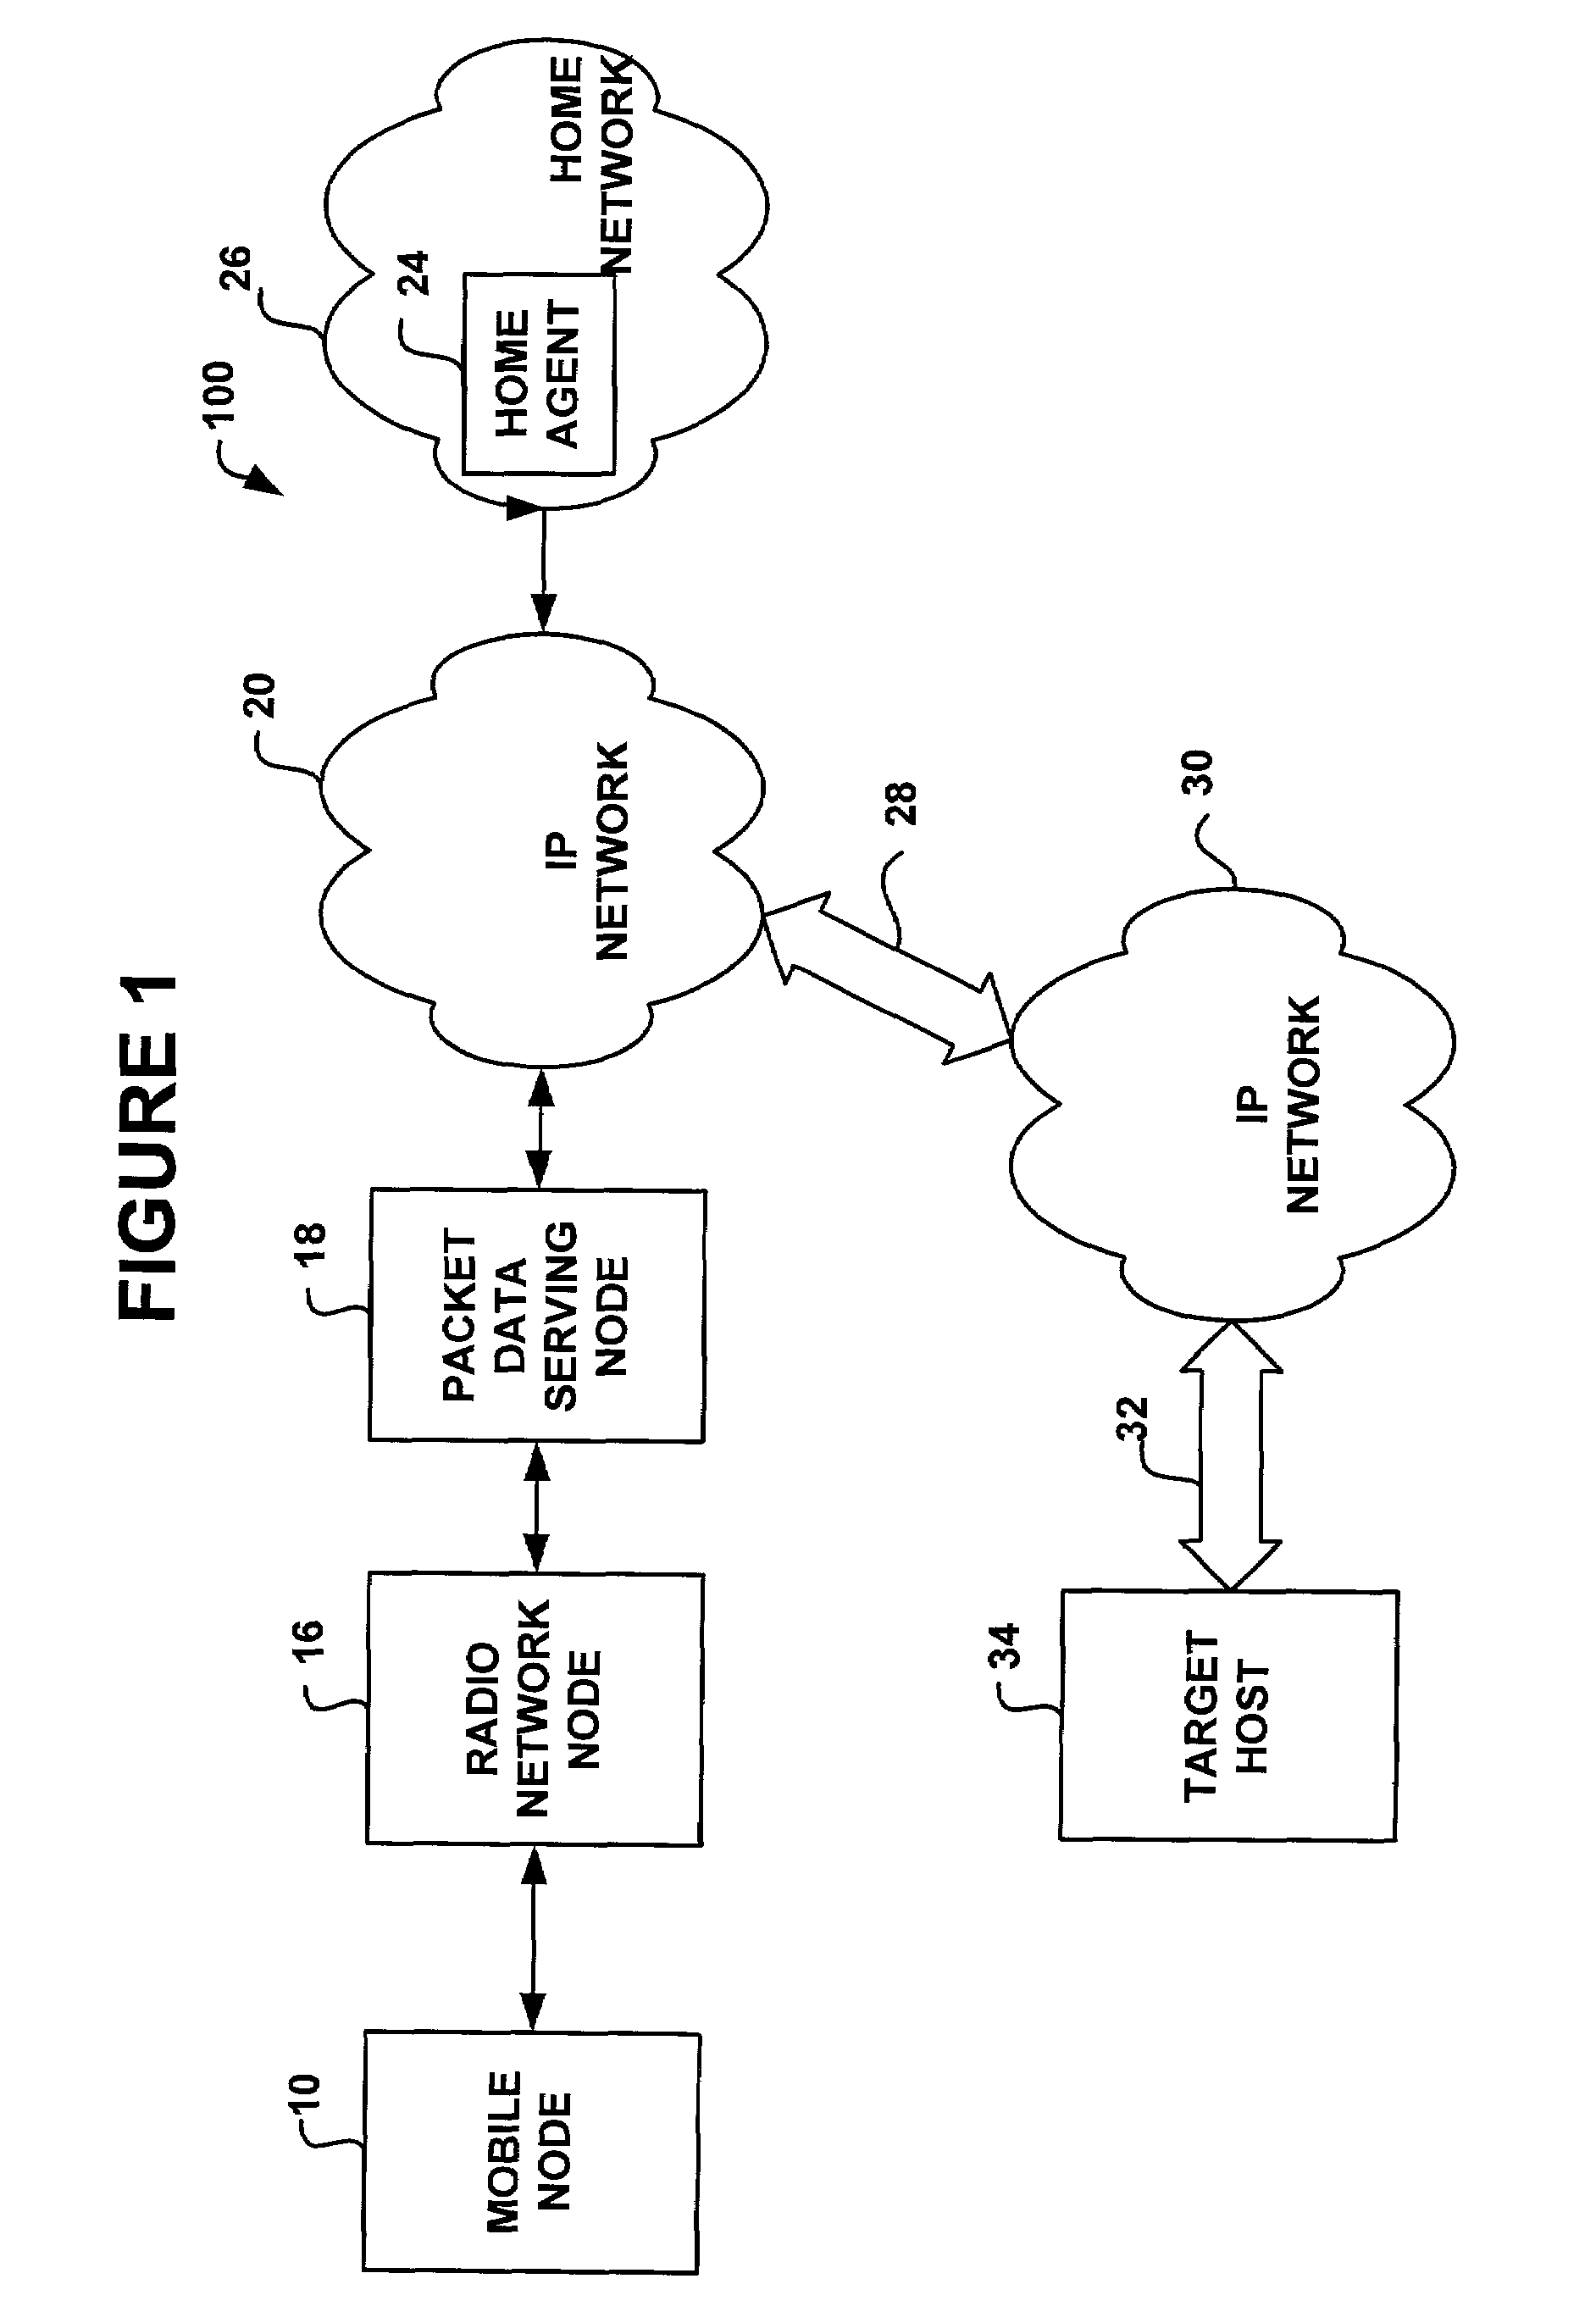 System and method for packet data serving node load balancing and fault tolerance